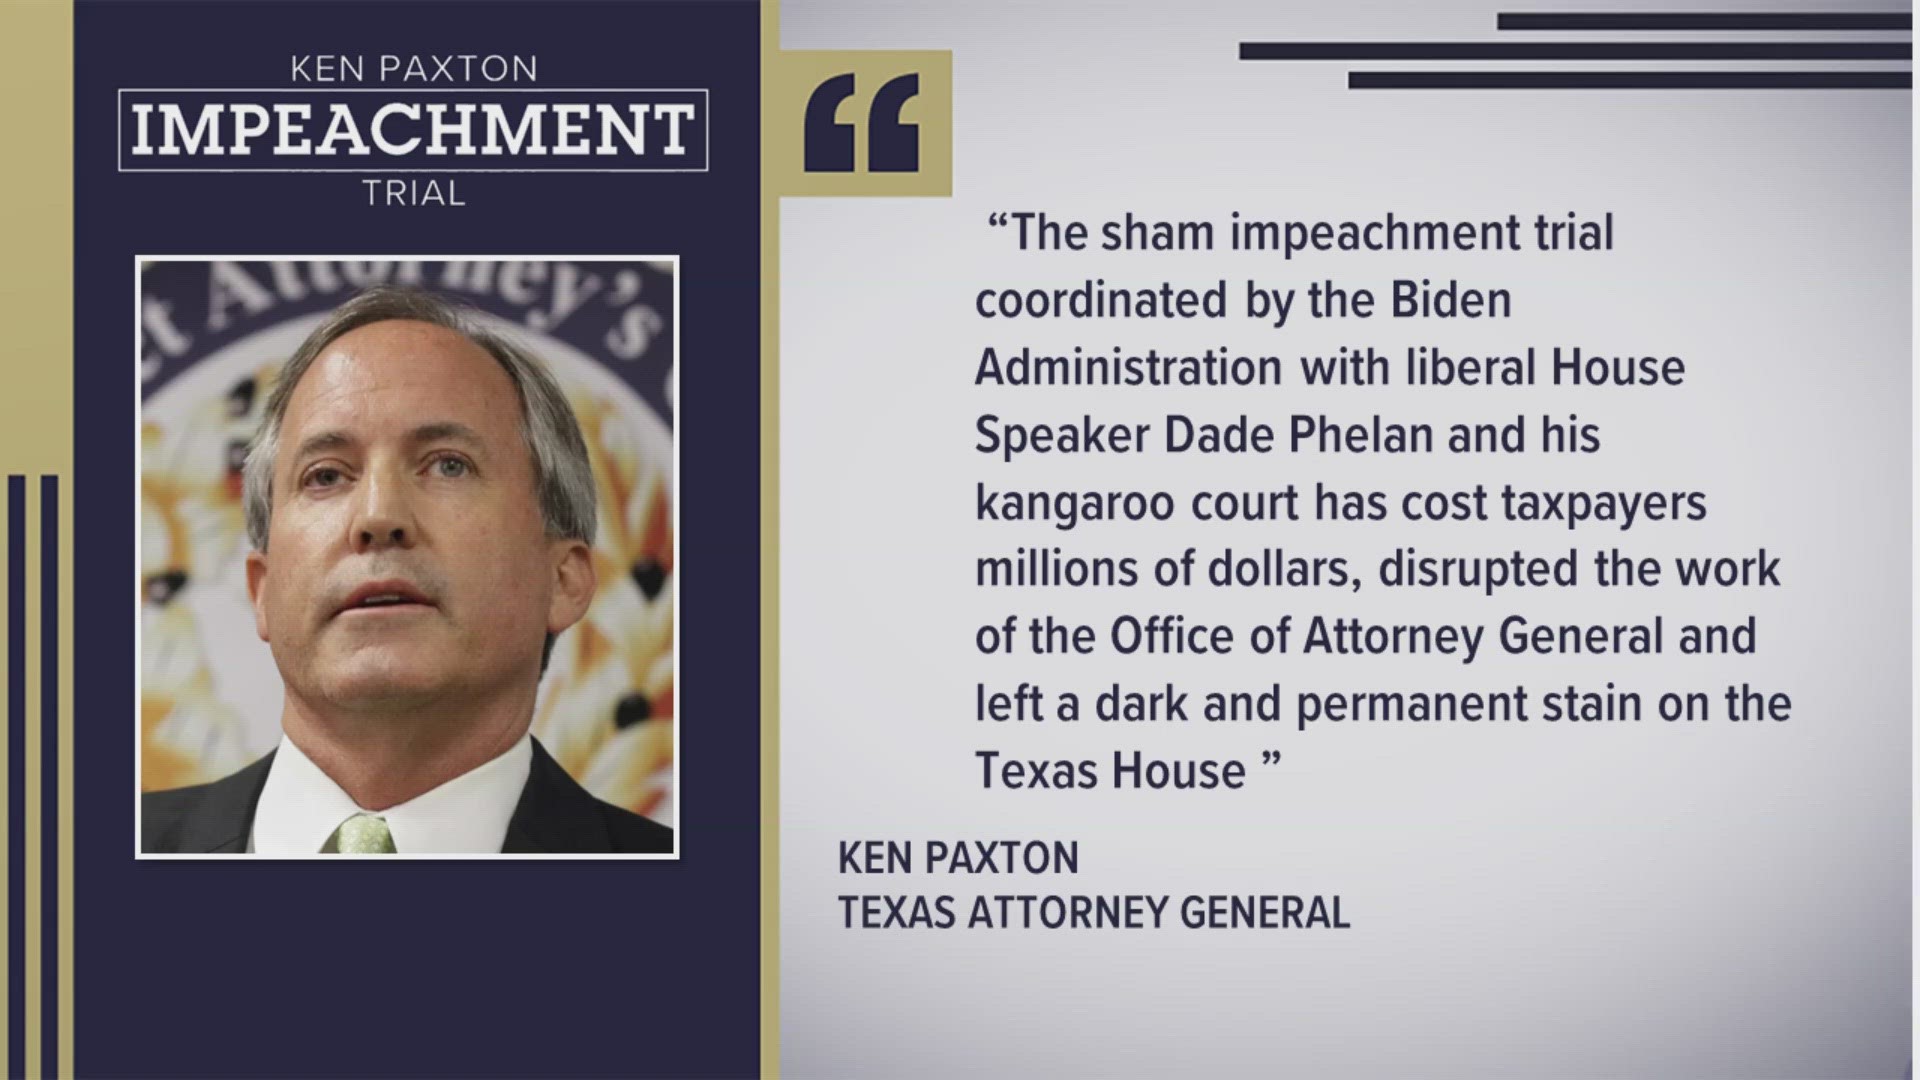 The Republican Texas attorney general was fully acquitted Saturday of corruption charges in a historic impeachment trial with the votes primarily along party lines.